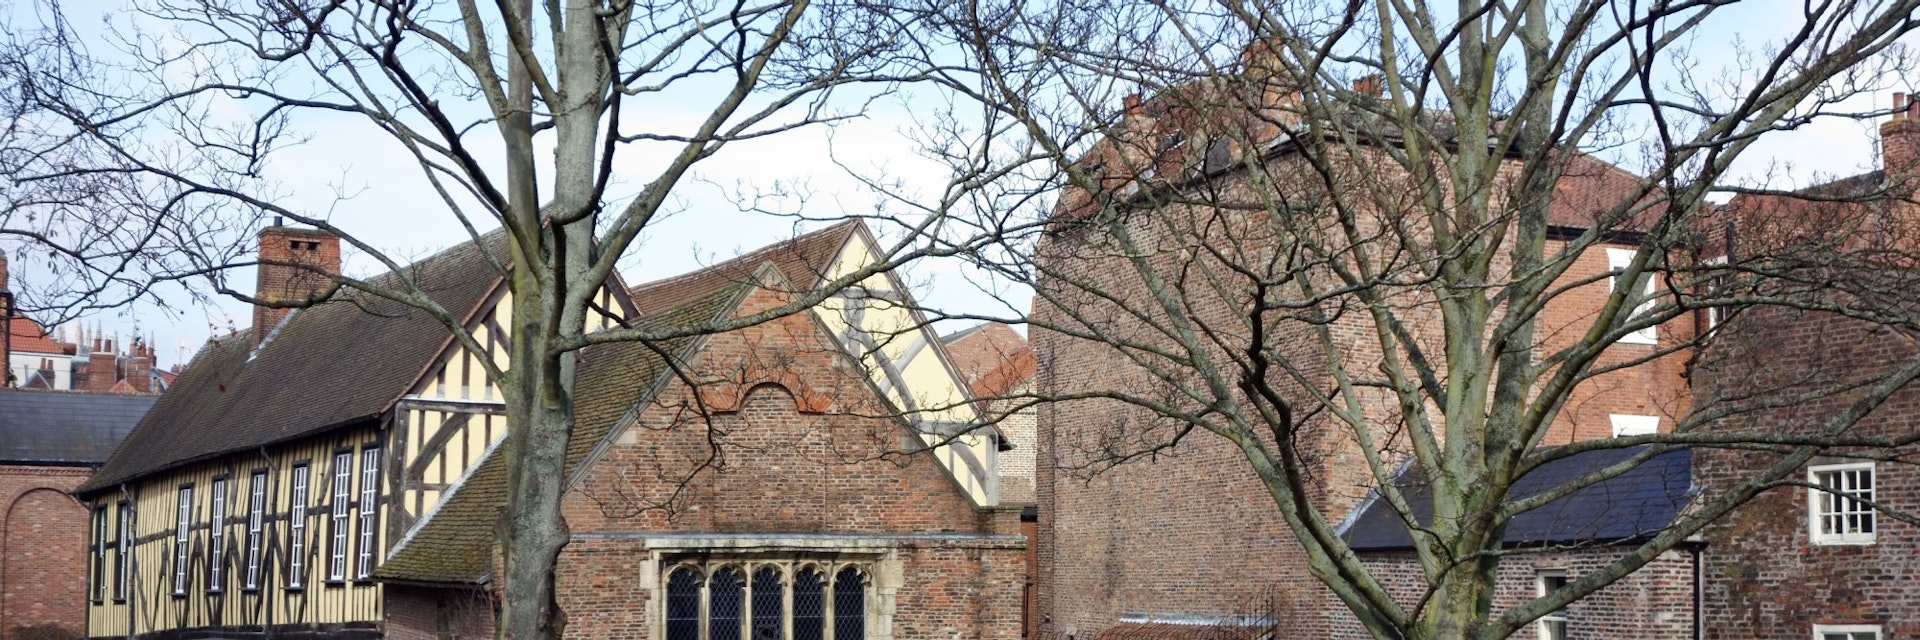 York, UK - February 19, 2013: Merchant Adventurers Hall was constructed in the fourteenth century and is still in use today. An senior couple is strolling in the grounds and tow men in the background are picking up litter.